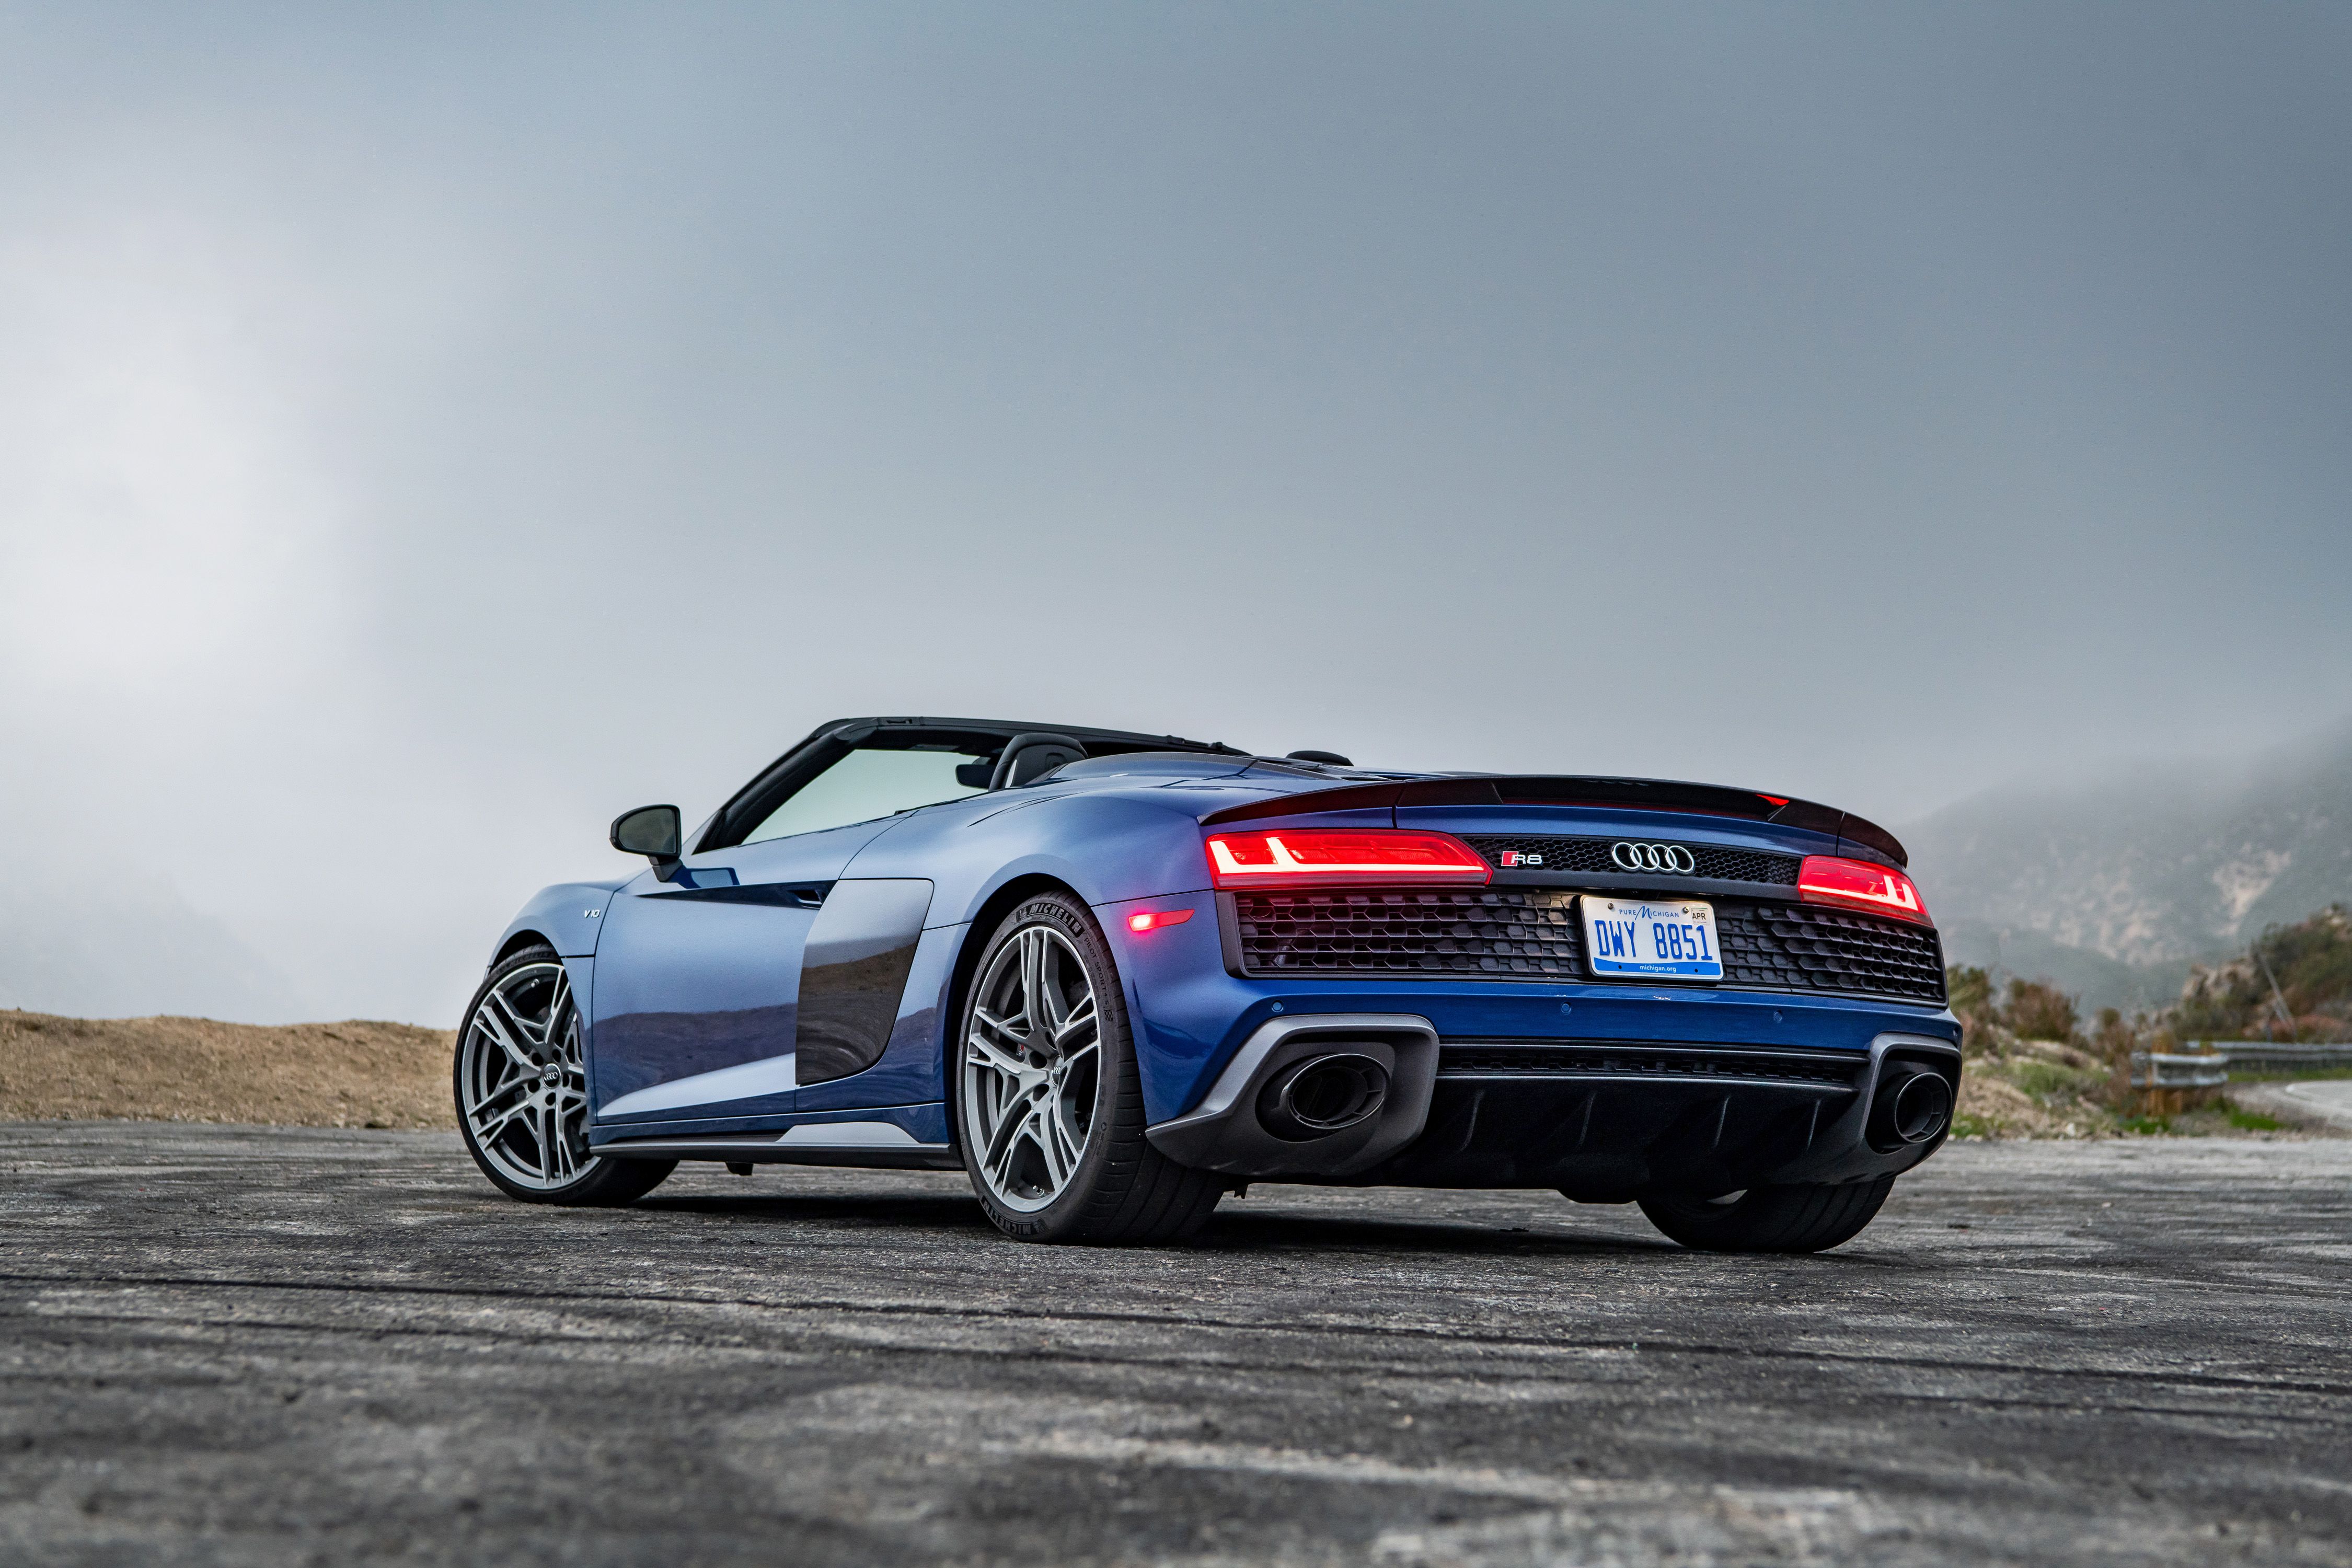 2022 Audi R8 Convertible Prices, Reviews, and Pictures